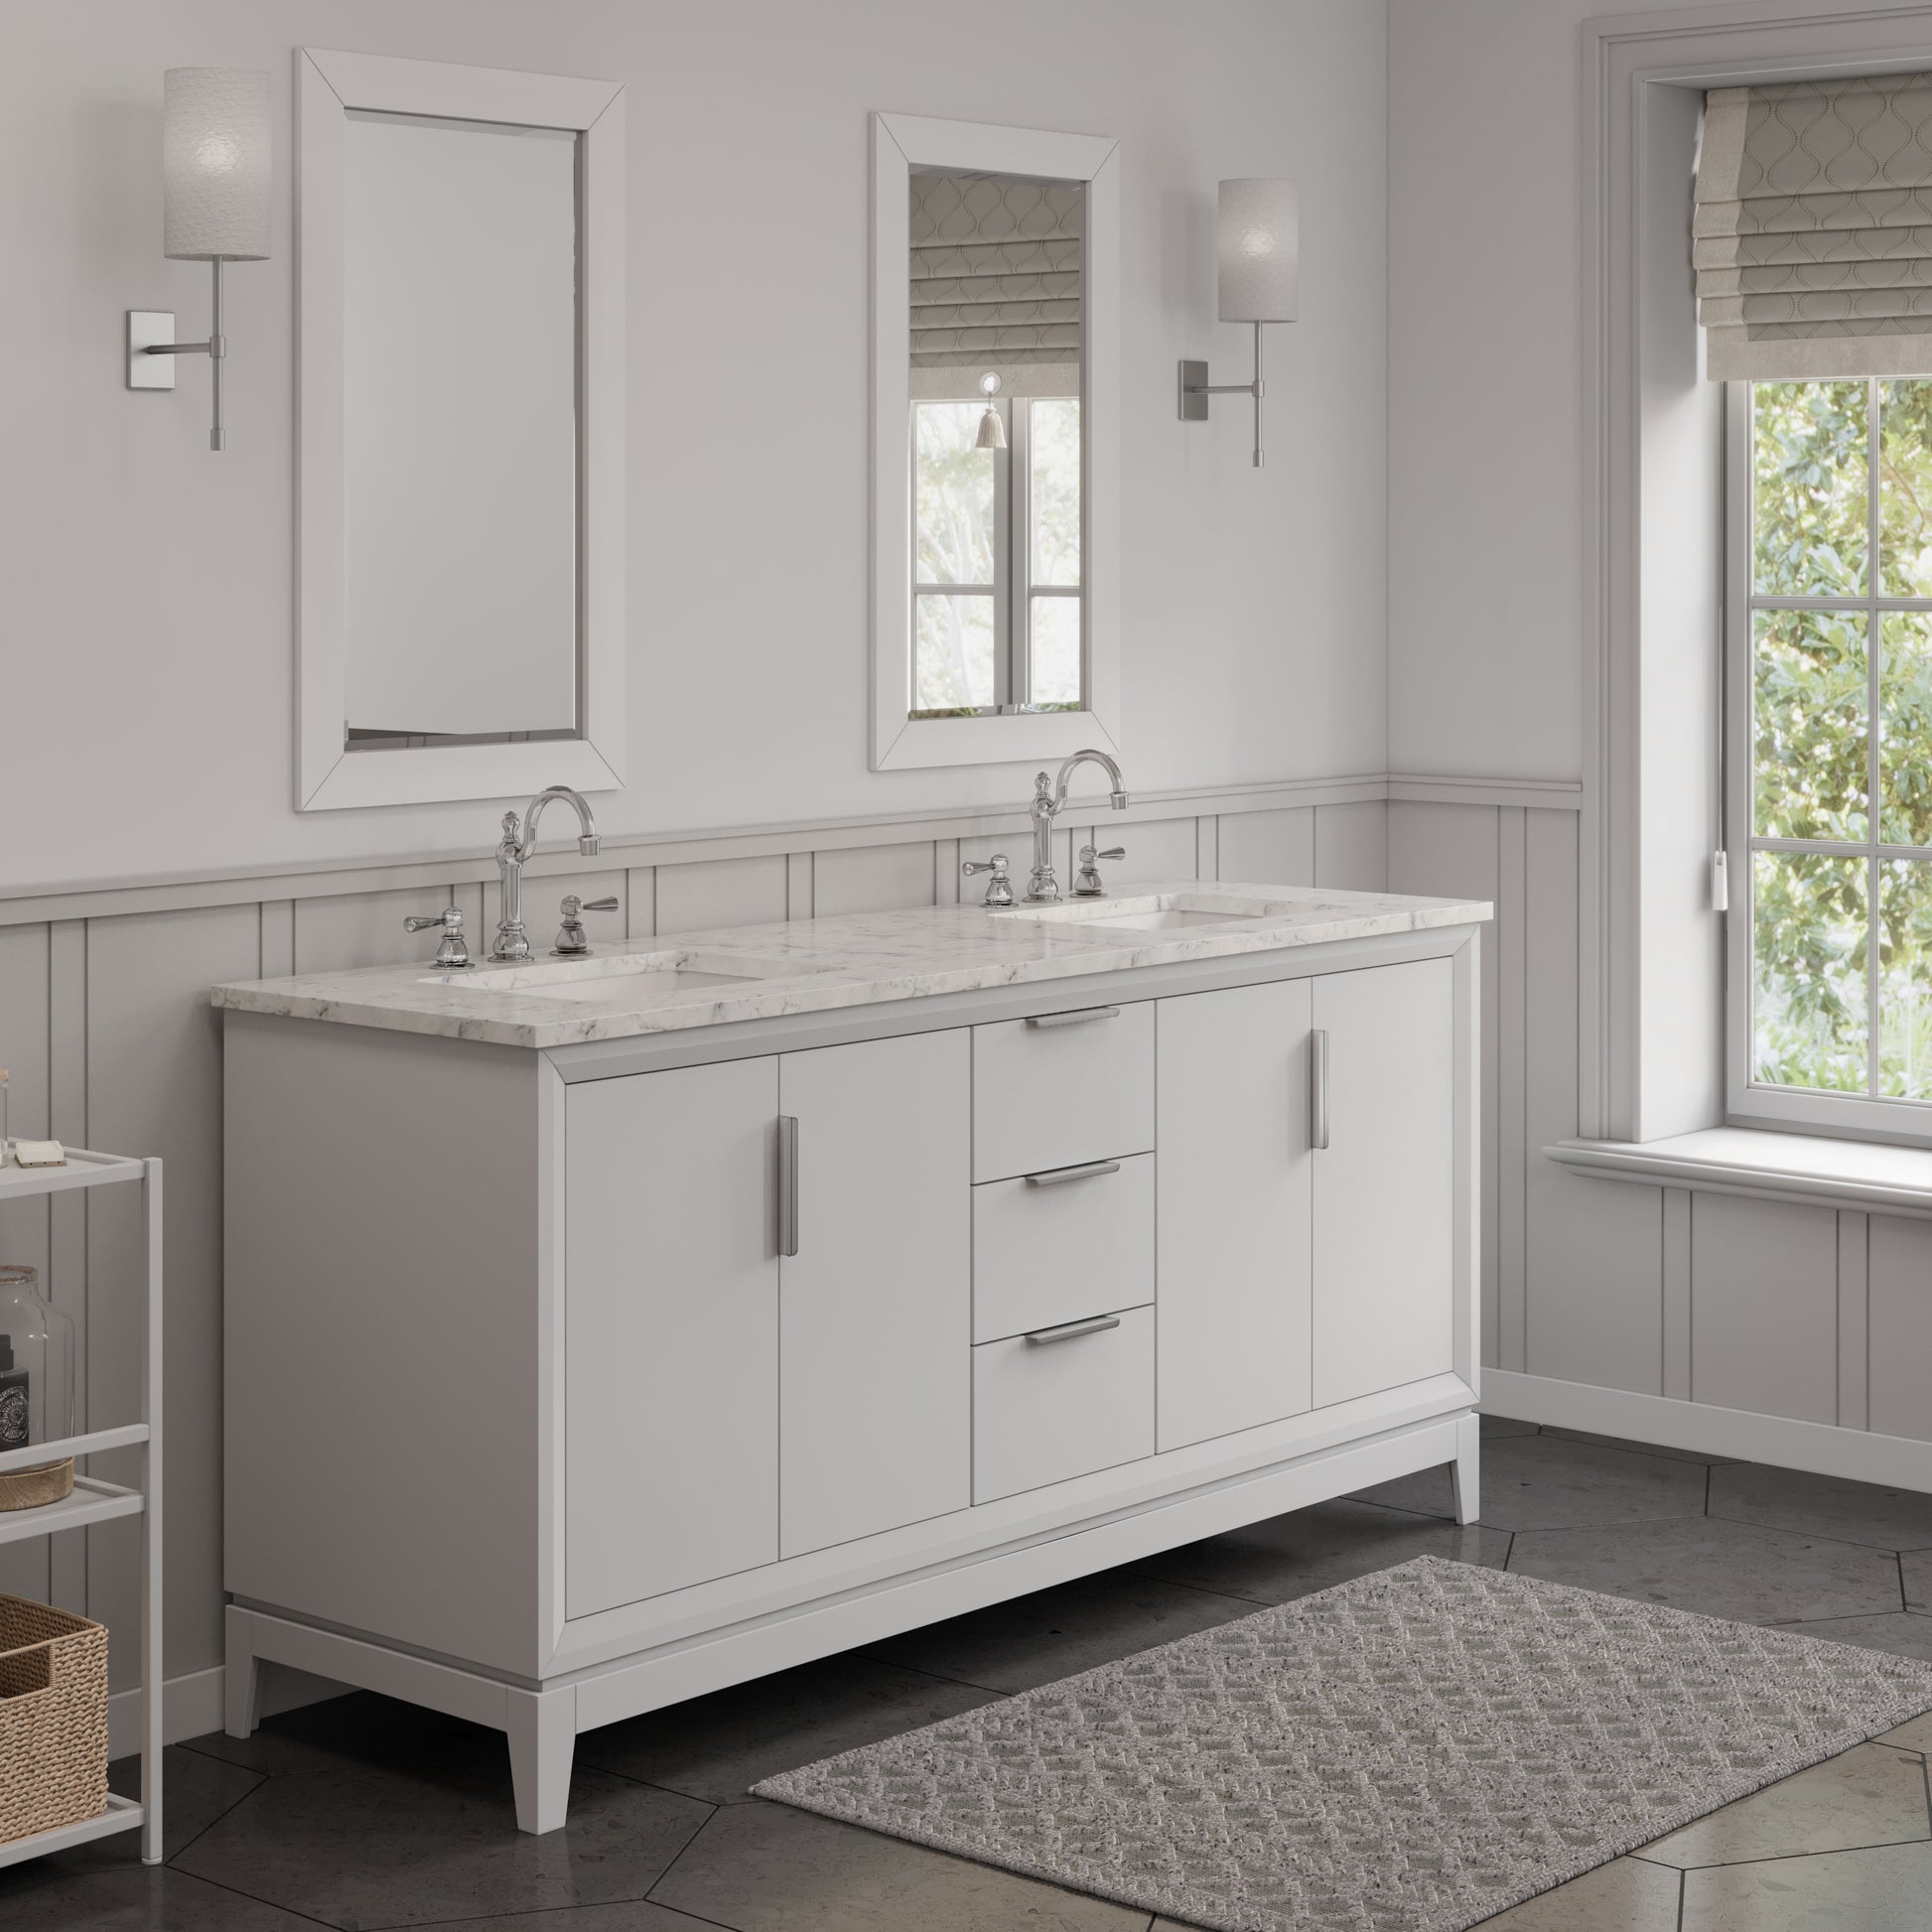 ELIZABETH 72"W x 34.25"H Pure White Double-Sink Vanity with Carrara White Marble Countertop + Faucets (F2-0012-01-TL)